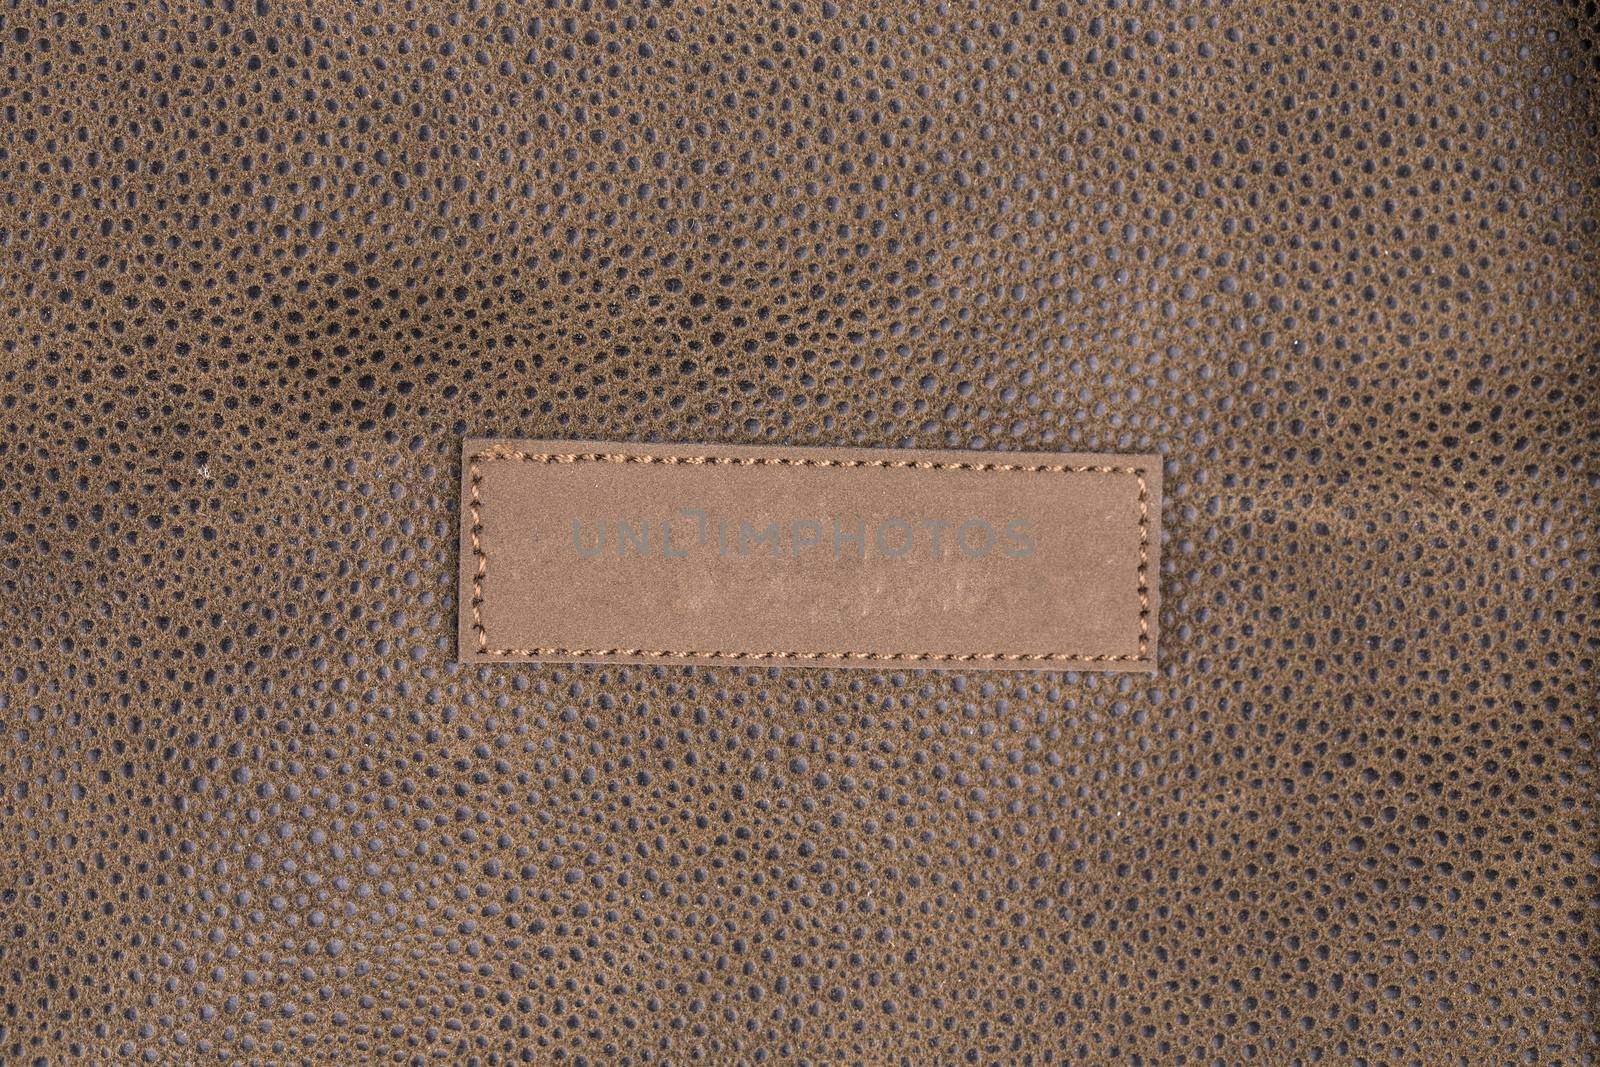 Brown leather texture as background by ozaiachin